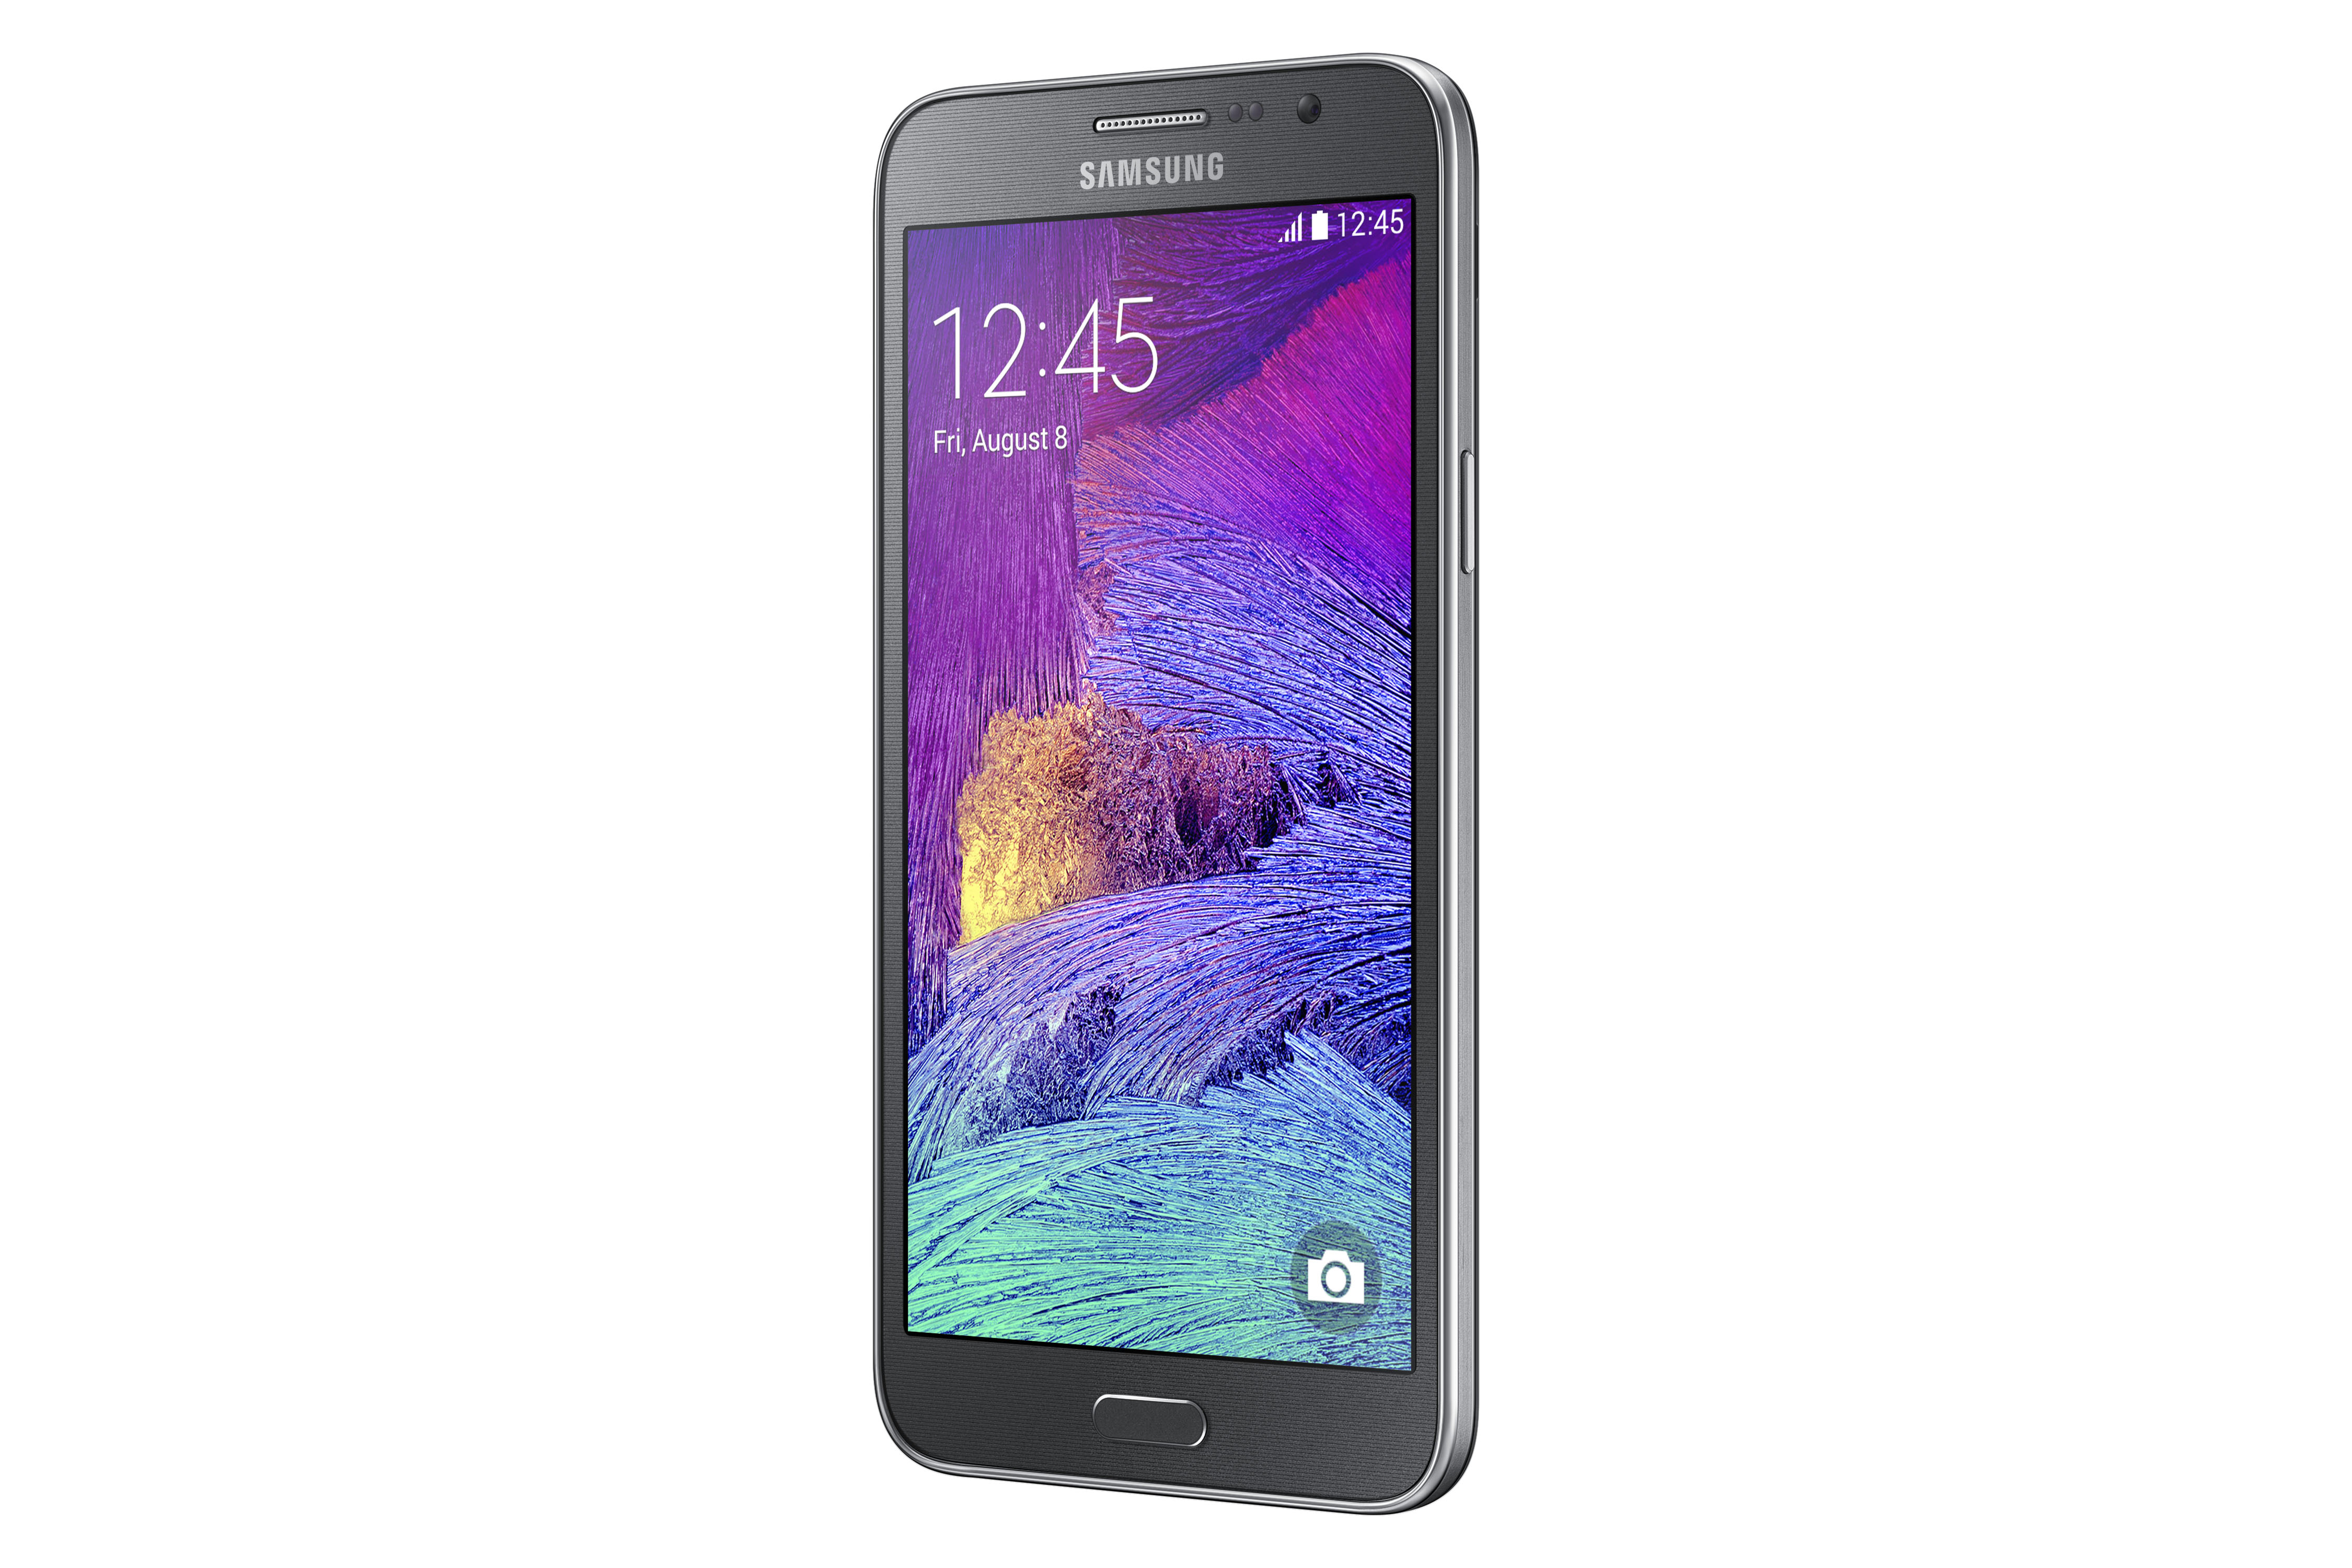 Samsung Galaxy Grand Max Launched In India: Specs, Features & Price - Intellect Digest India